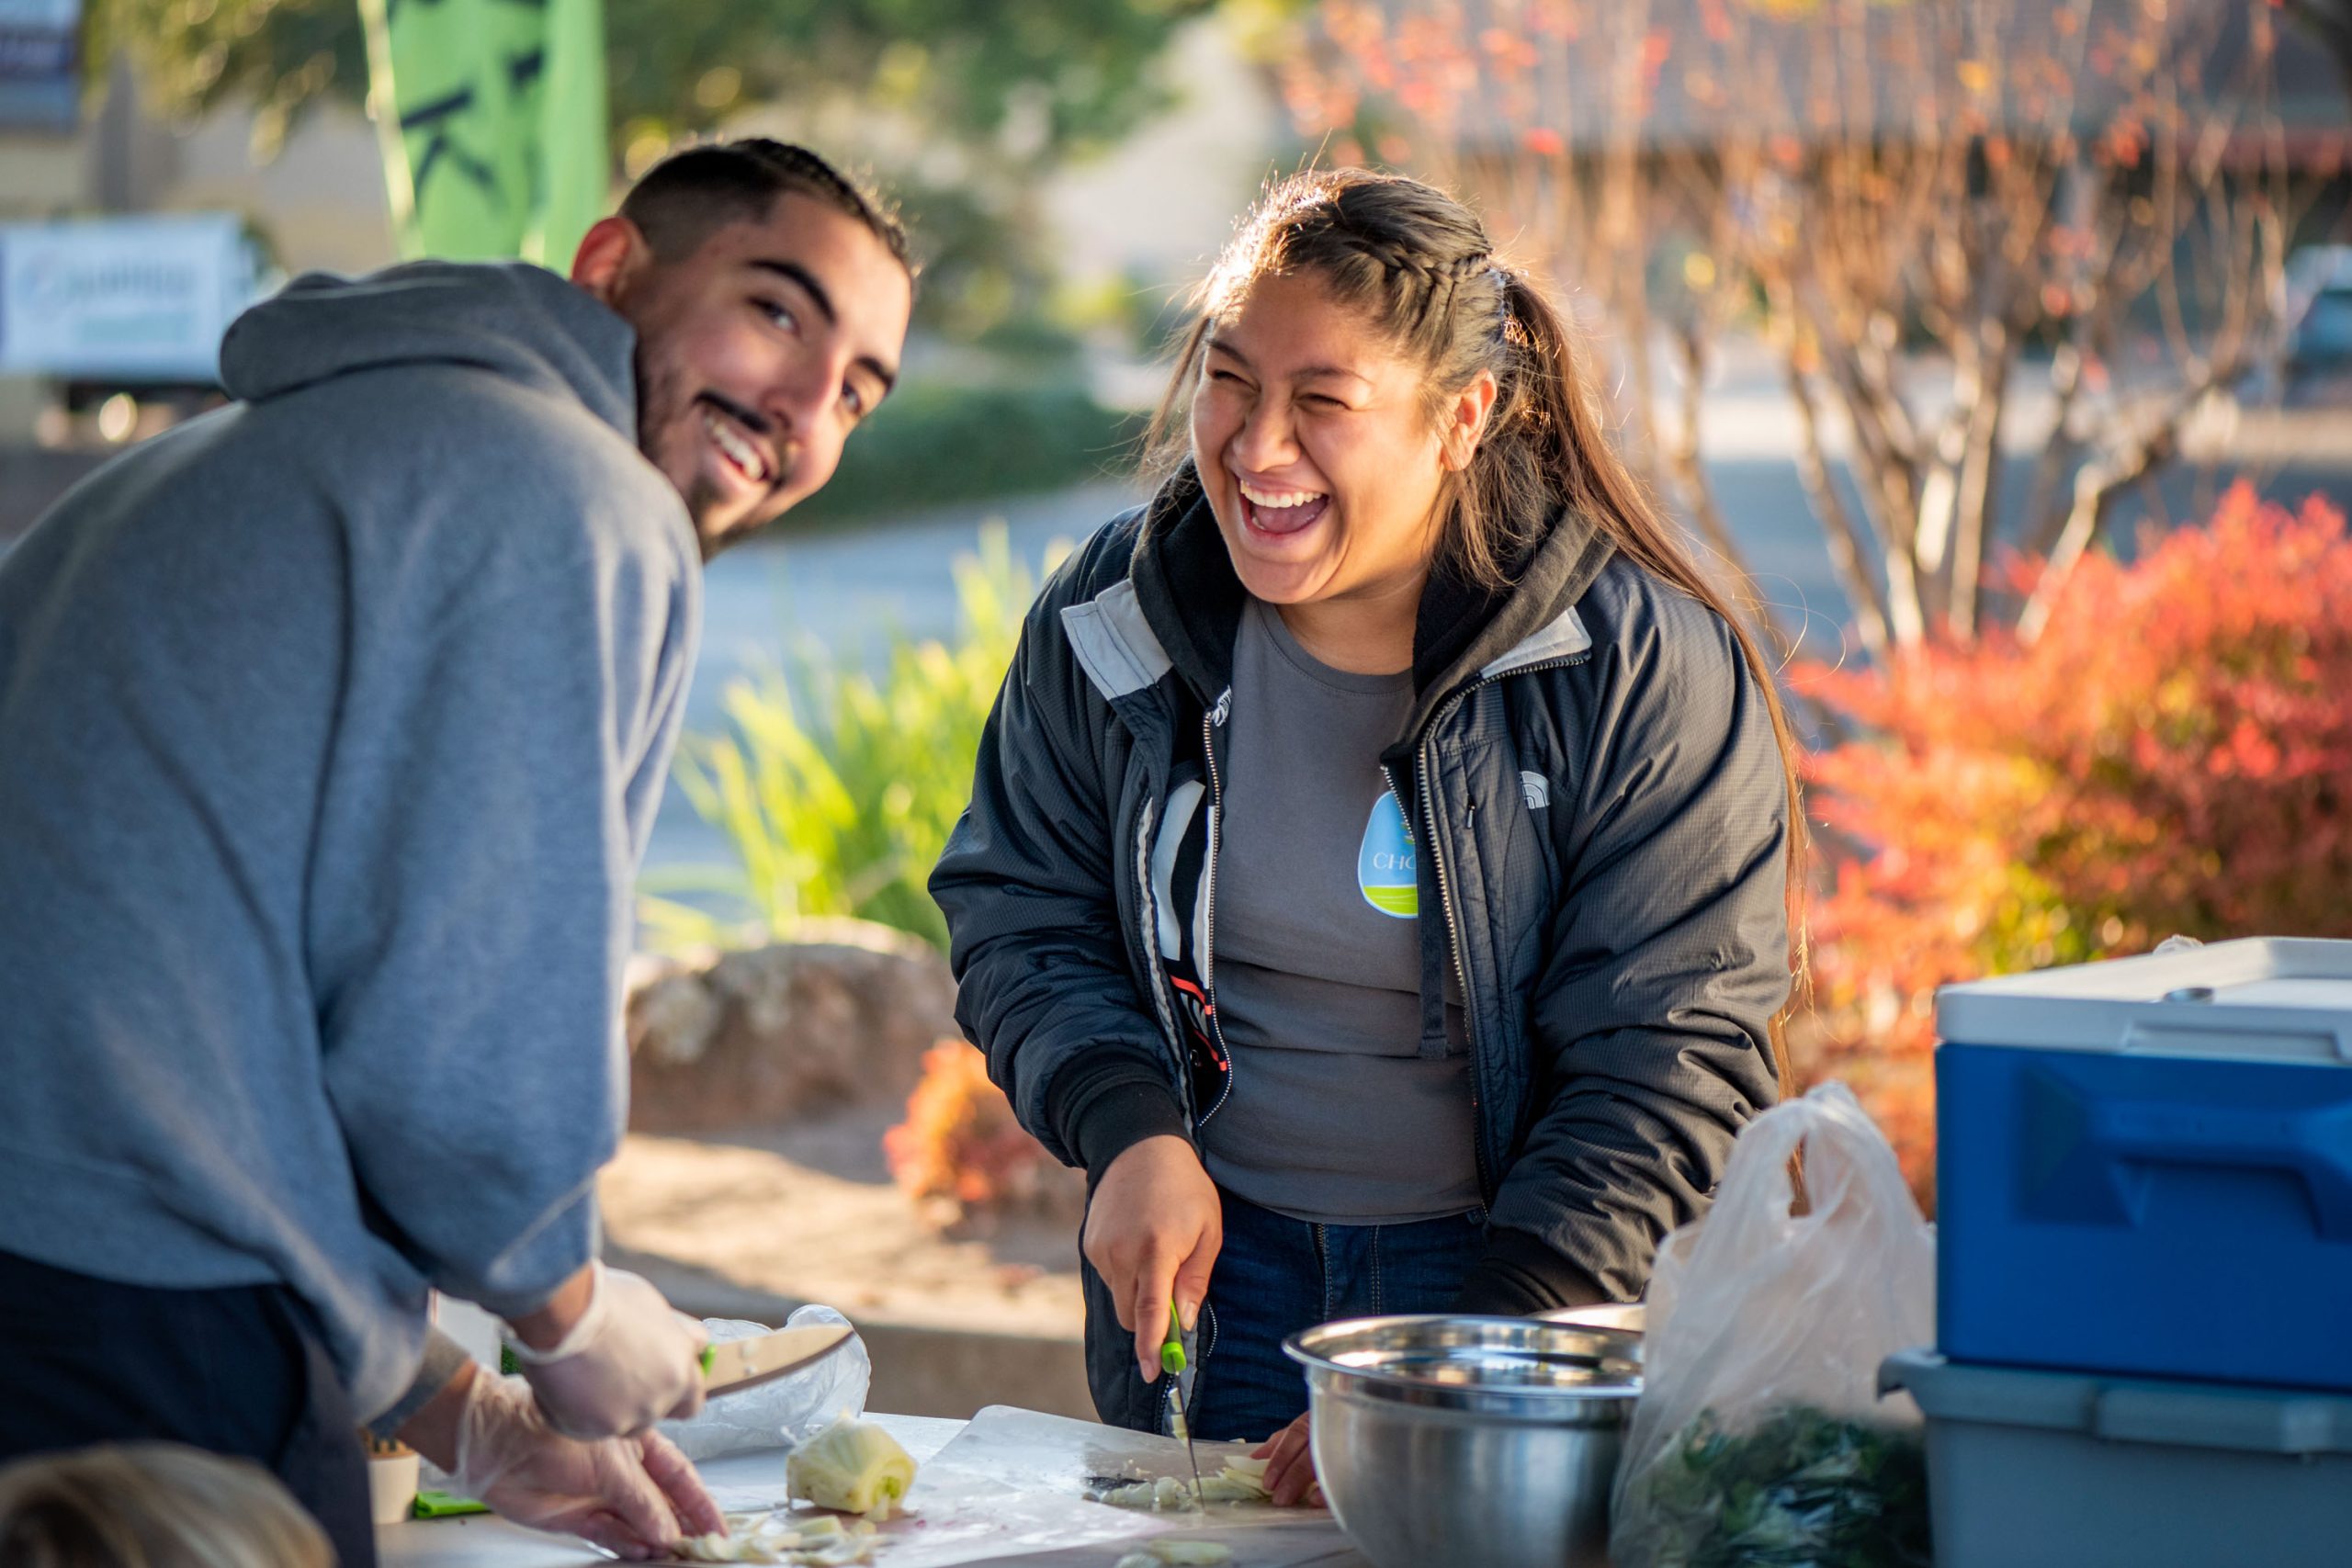 2 CHC staff laughing as they prepare healthy food samples at a local farmers market.